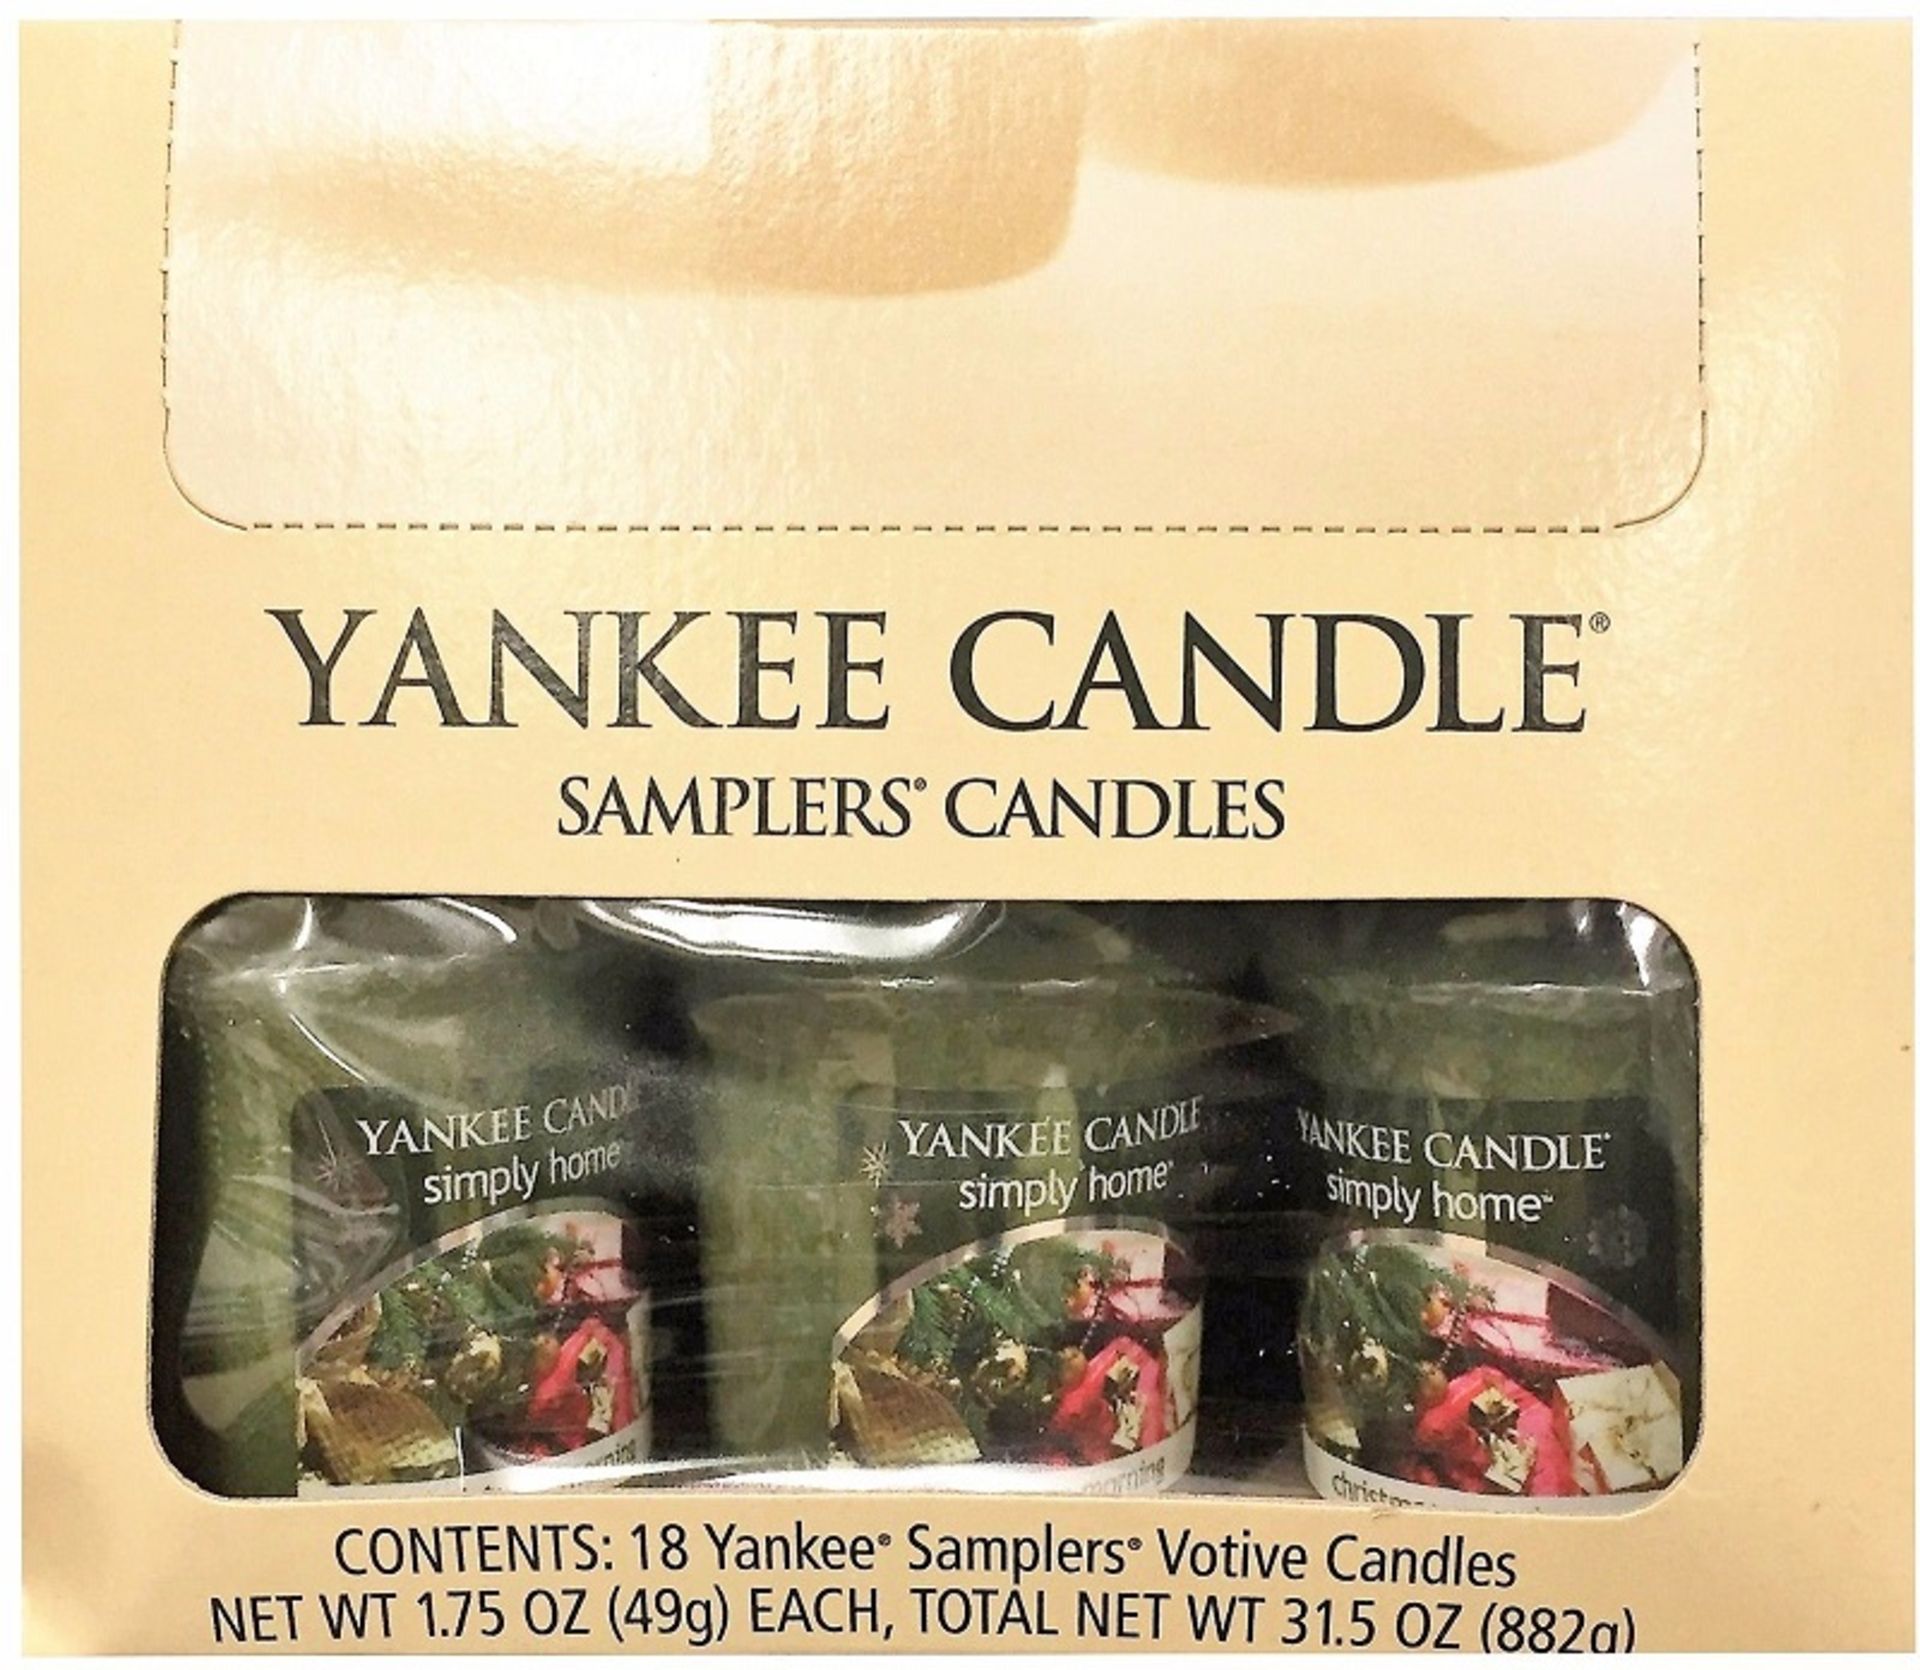 V Brand New 18 x Yankee Candle Christmas Morning 49g eBay Price £19.99 X 2 YOUR BID PRICE TO BE - Image 2 of 2